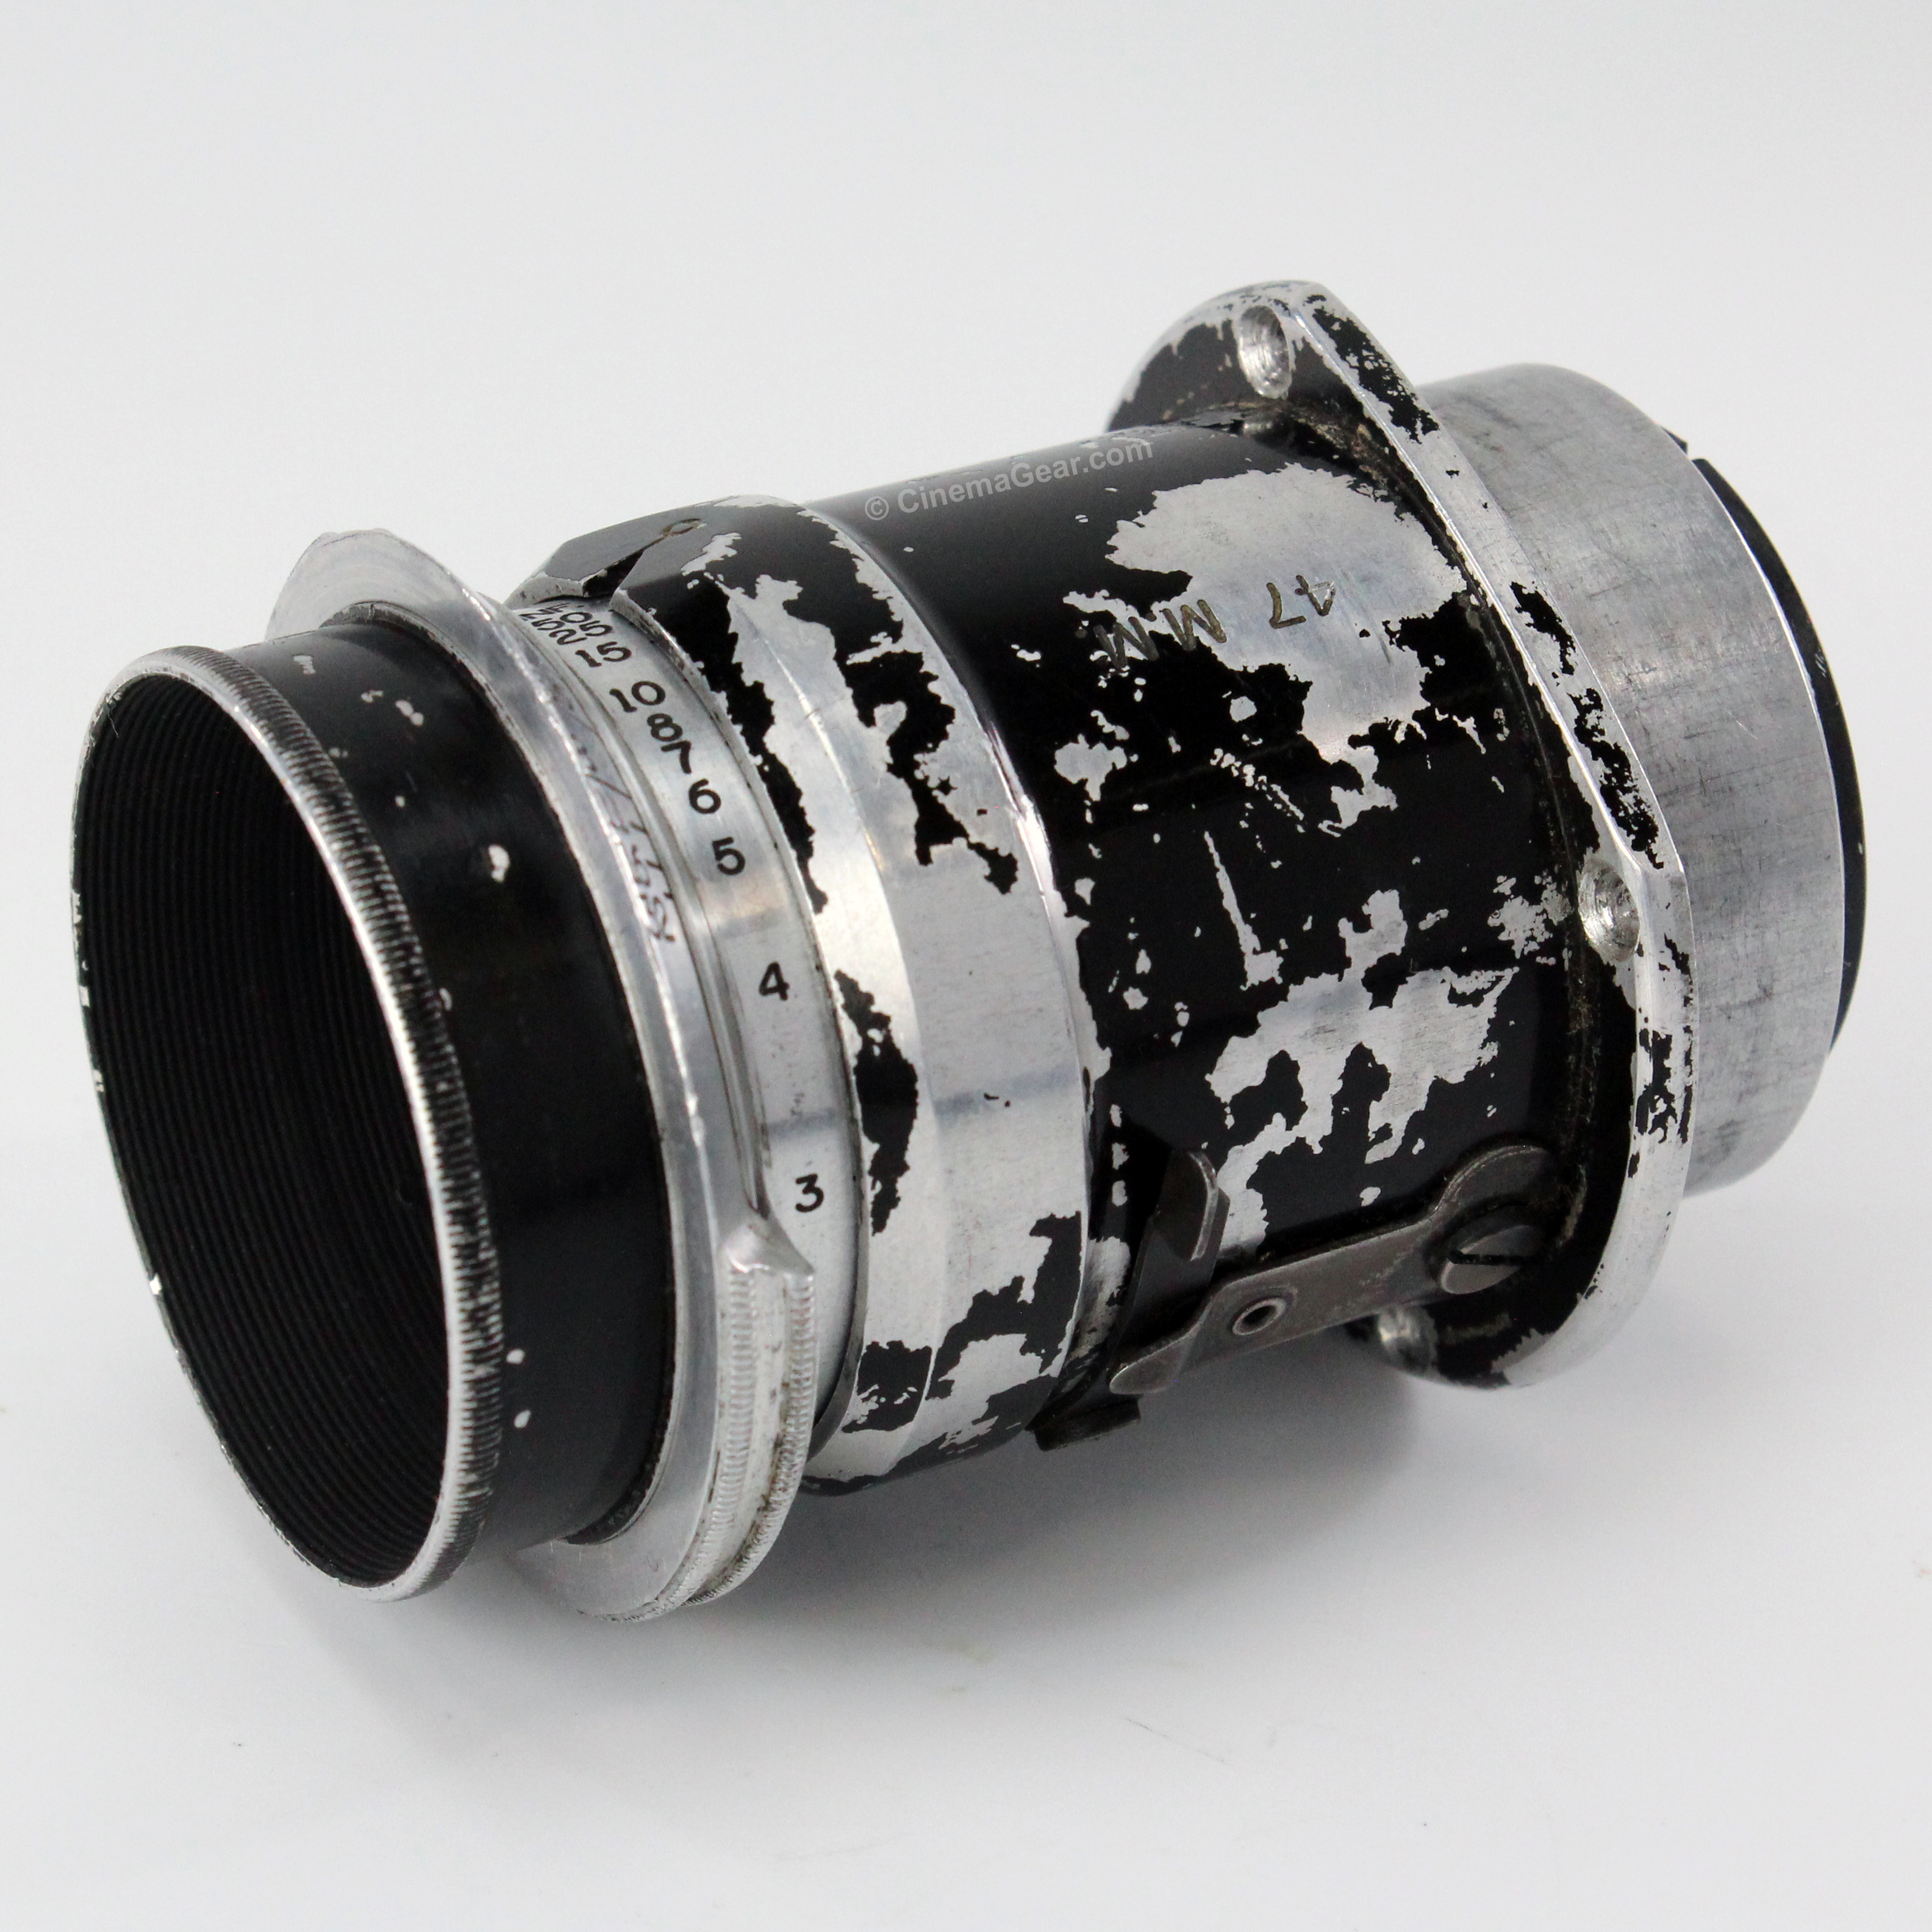 Cooke Speed Panchro 47mm f2 lens in Bell & Howell 2709 mount.